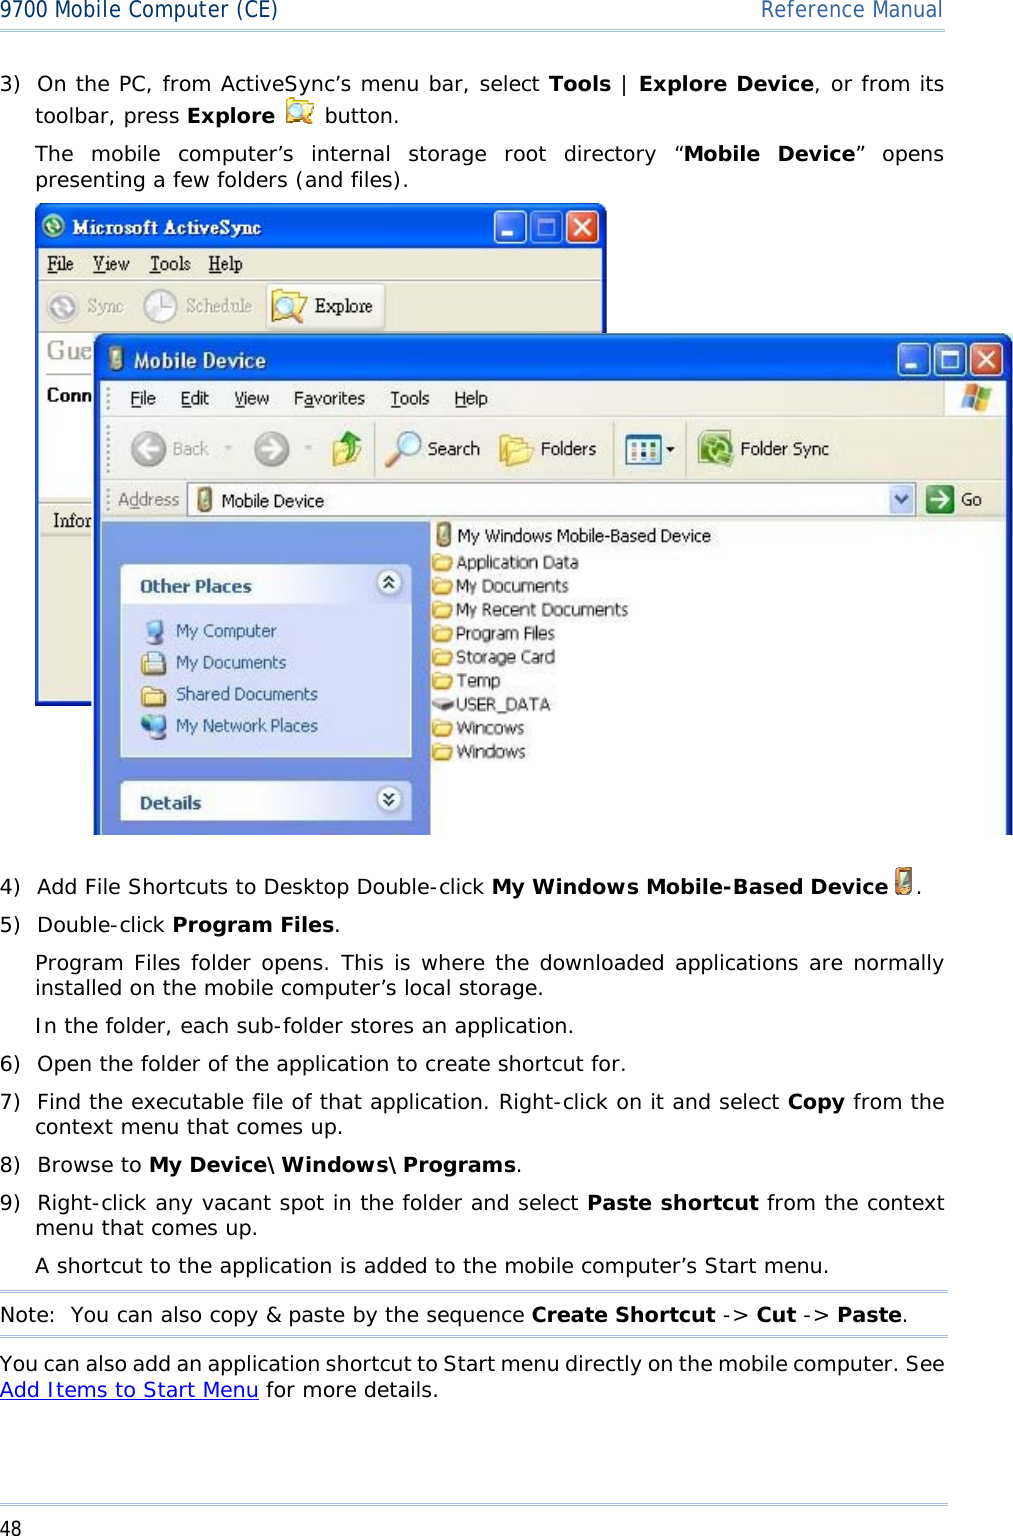 489700 Mobile Computer (CE)  Reference Manual3) On the PC, from ActiveSync’s menu bar, select Tools | Explore Device, or from its toolbar, press Explore  button.The mobile computer’s internal storage root directory “Mobile Device” opens presenting a few folders (and files). 4) Add File Shortcuts to Desktop Double-click My Windows Mobile-Based Device .5) Double-click Program Files.Program Files folder opens. This is where the downloaded applications are normally installed on the mobile computer’s local storage. In the folder, each sub-folder stores an application. 6) Open the folder of the application to create shortcut for. 7) Find the executable file of that application. Right-click on it and select Copy from the context menu that comes up. 8) Browse to My Device\Windows\Programs.9) Right-click any vacant spot in the folder and select Paste shortcut from the context menu that comes up. A shortcut to the application is added to the mobile computer’s Start menu. Note:  You can also copy &amp; paste by the sequence Create Shortcut -&gt; Cut -&gt; Paste.You can also add an application shortcut to Start menu directly on the mobile computer. See Add Items to Start Menu for more details. 